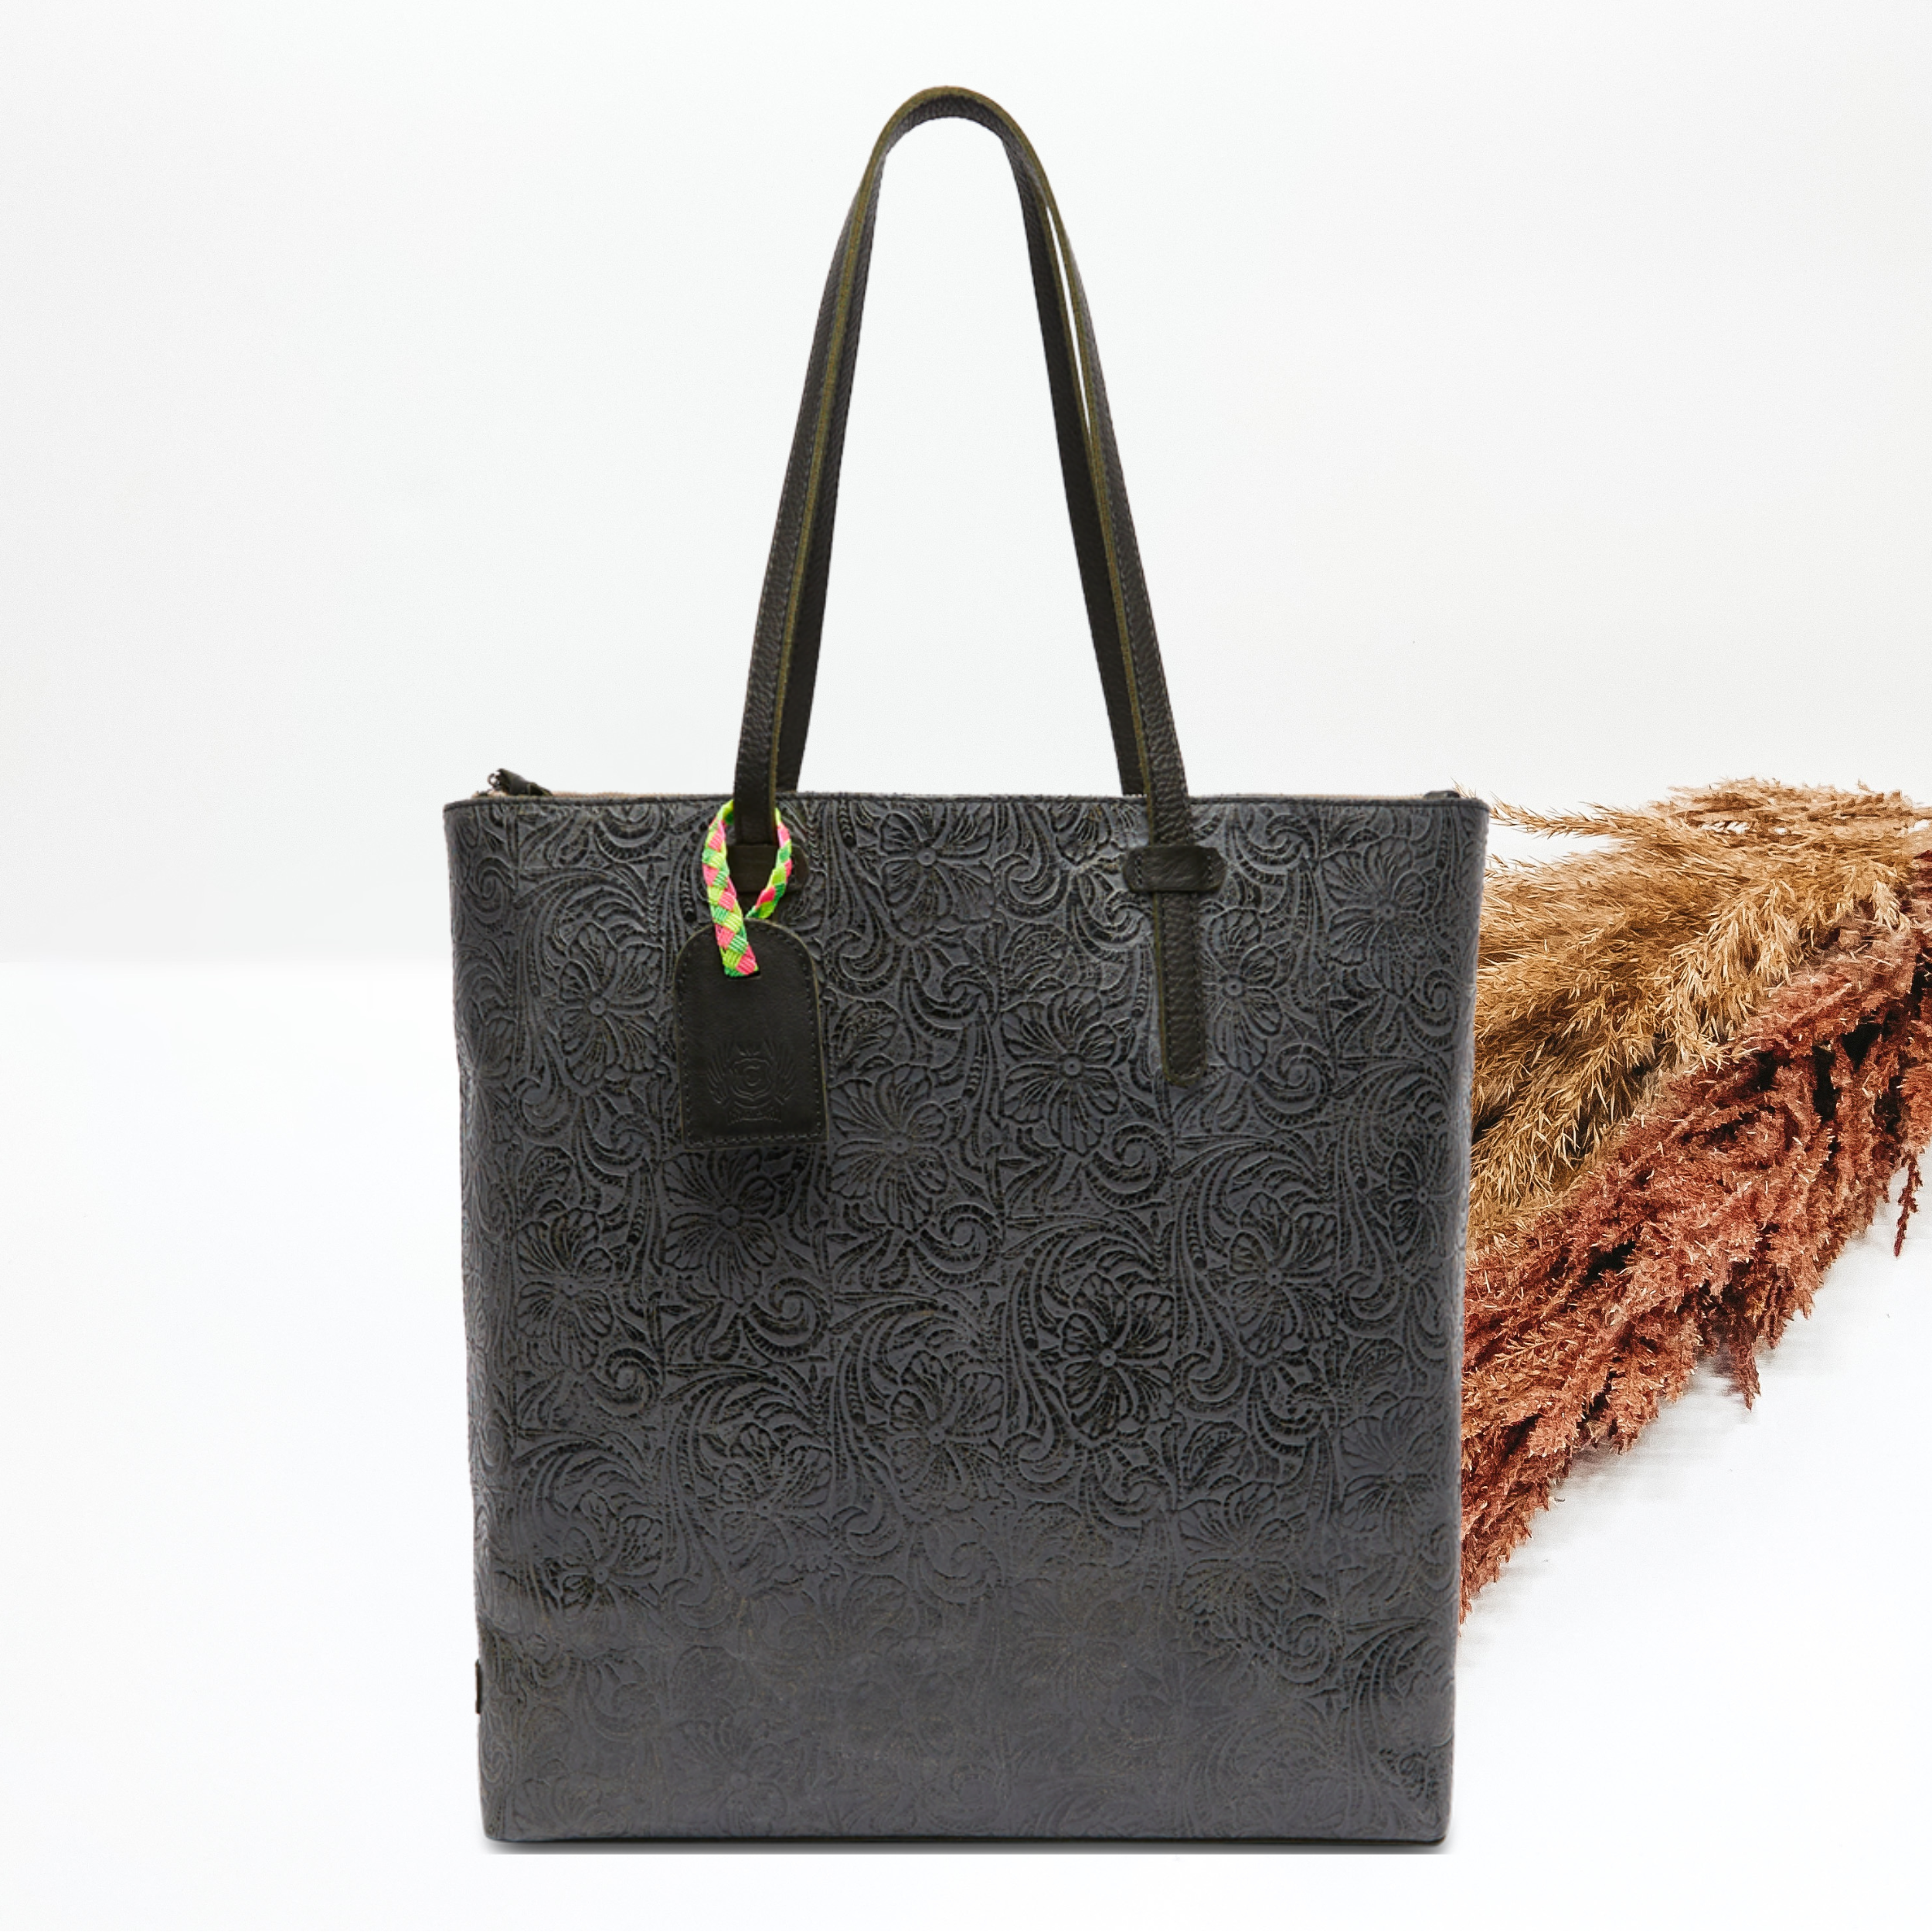 Pictured on a white background is a market tote bag with black leather shoulder straps and a a black luggage tag. This purse has a black leather tooled print.